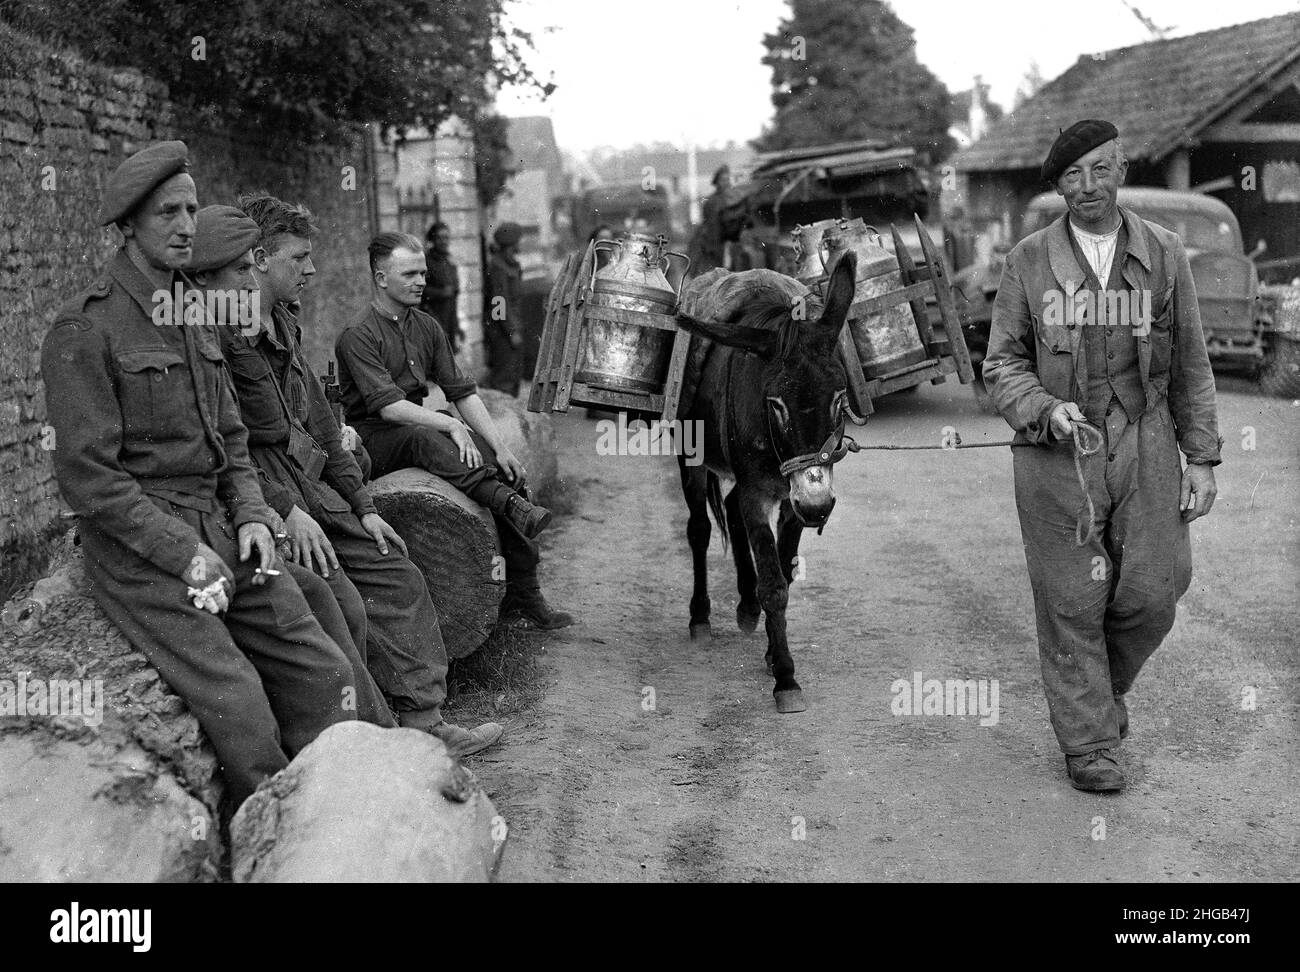 Northern France World War Two 1944 british soldiers watching French farmer delivering milk with a donkey. LARGER FILES AVAILABLE ON REQUEST Stock Photo